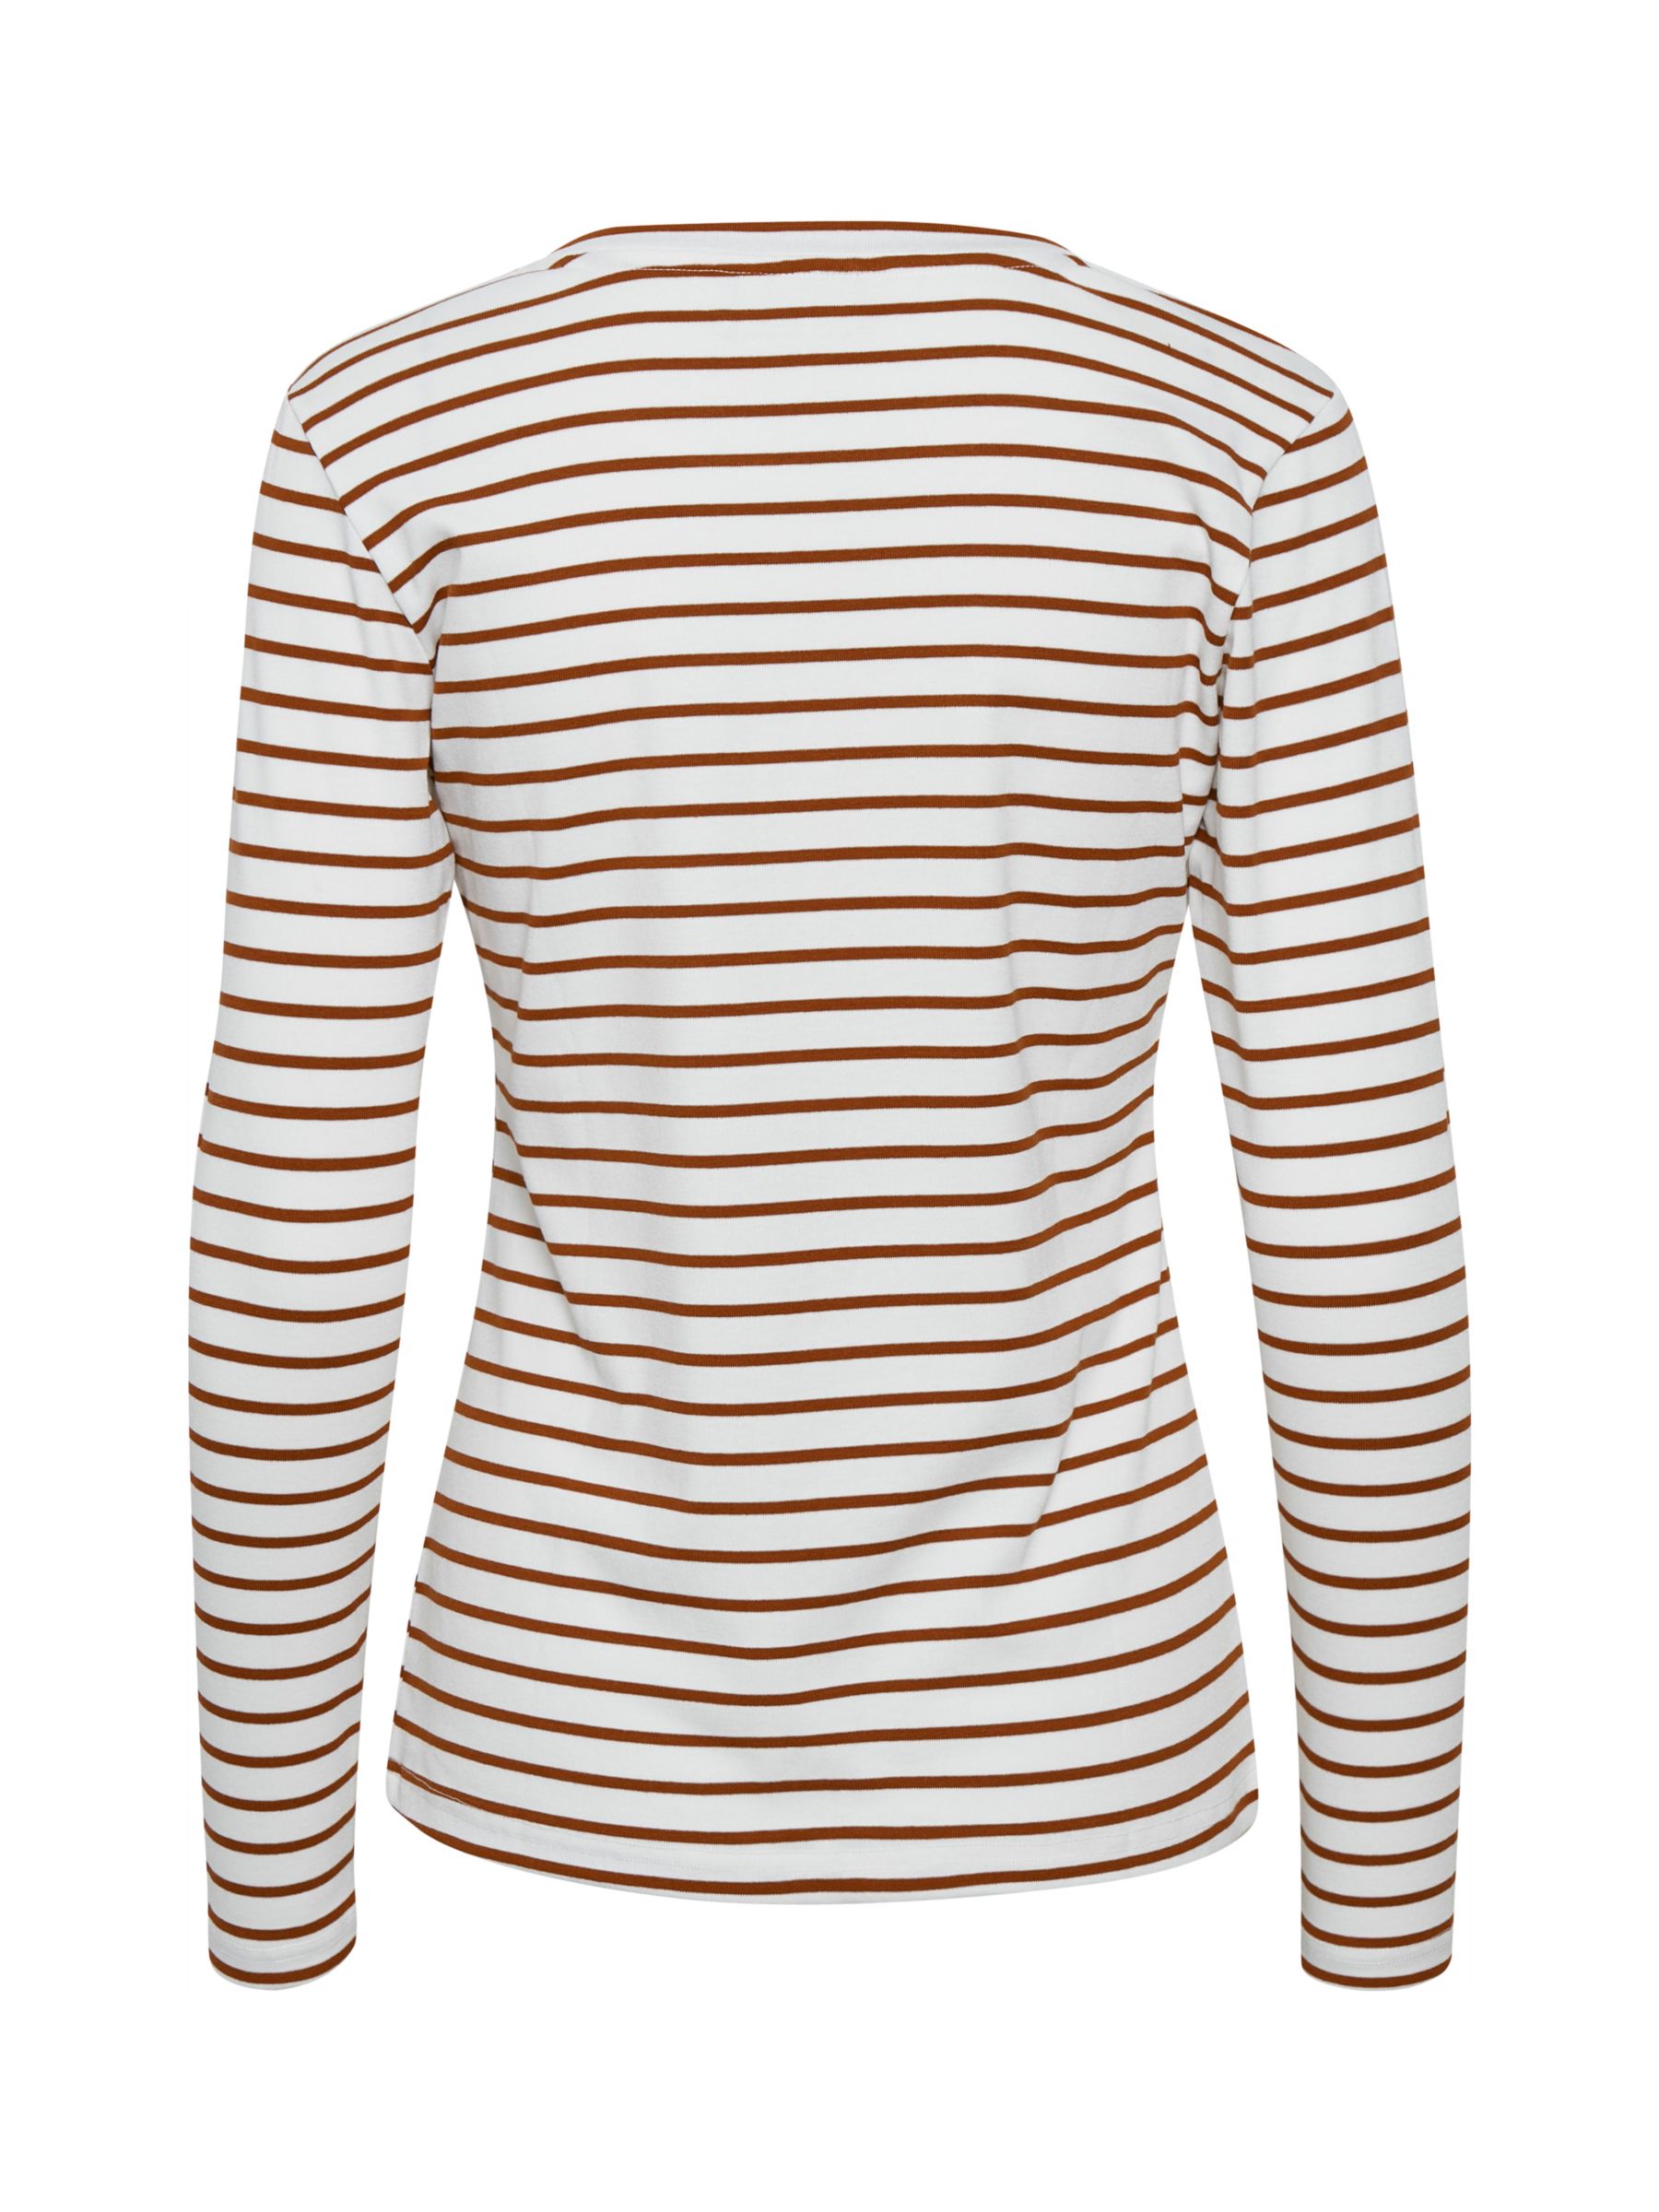 Women's Red Striped Shirts & Tops